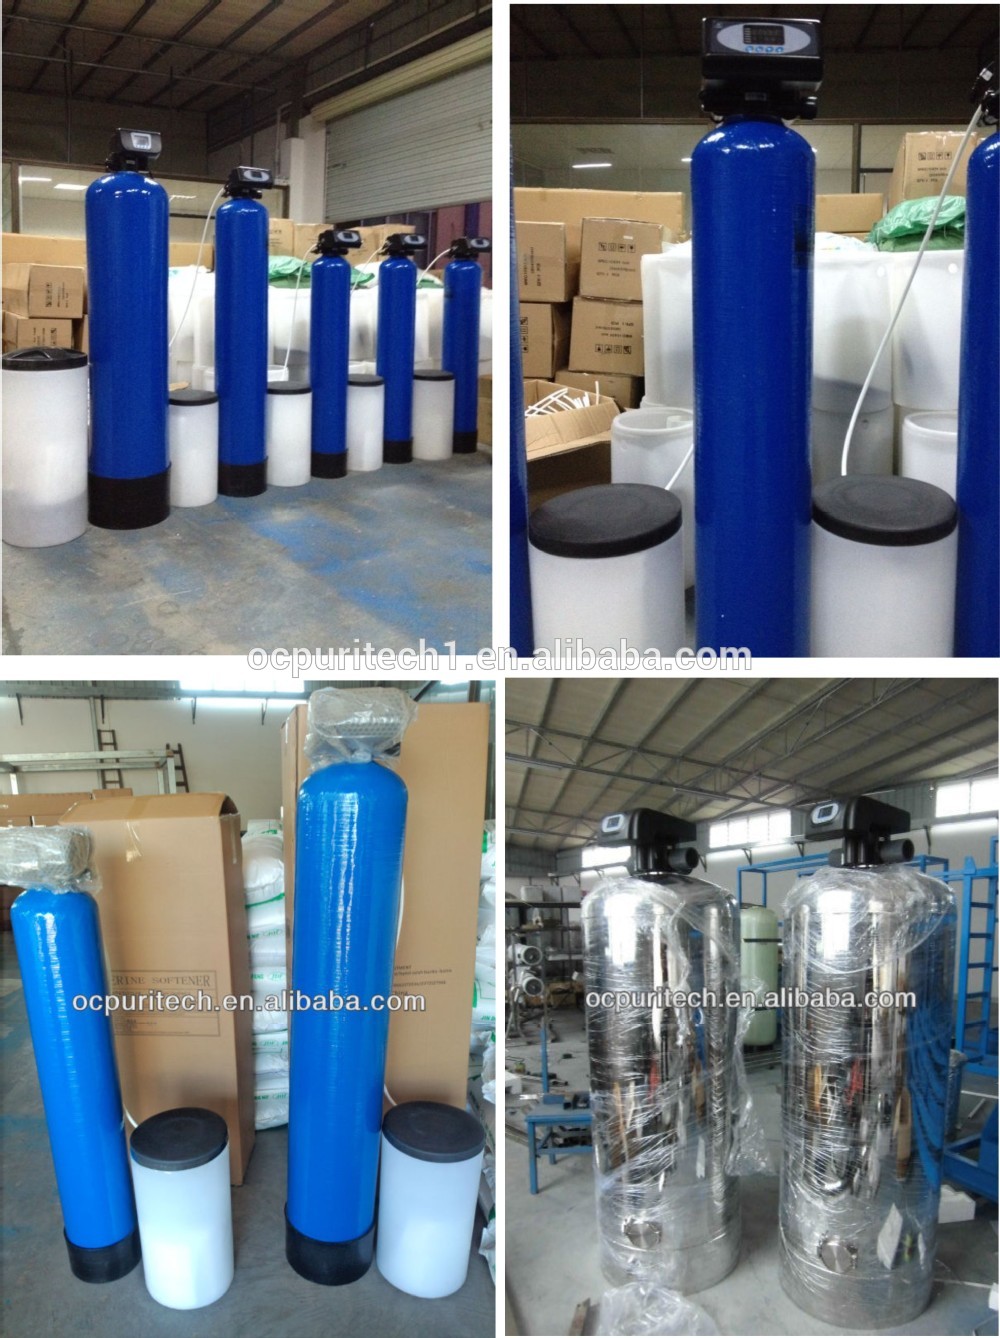 water Softener For Water Treatment Plant And Water Filter As Pretreatment